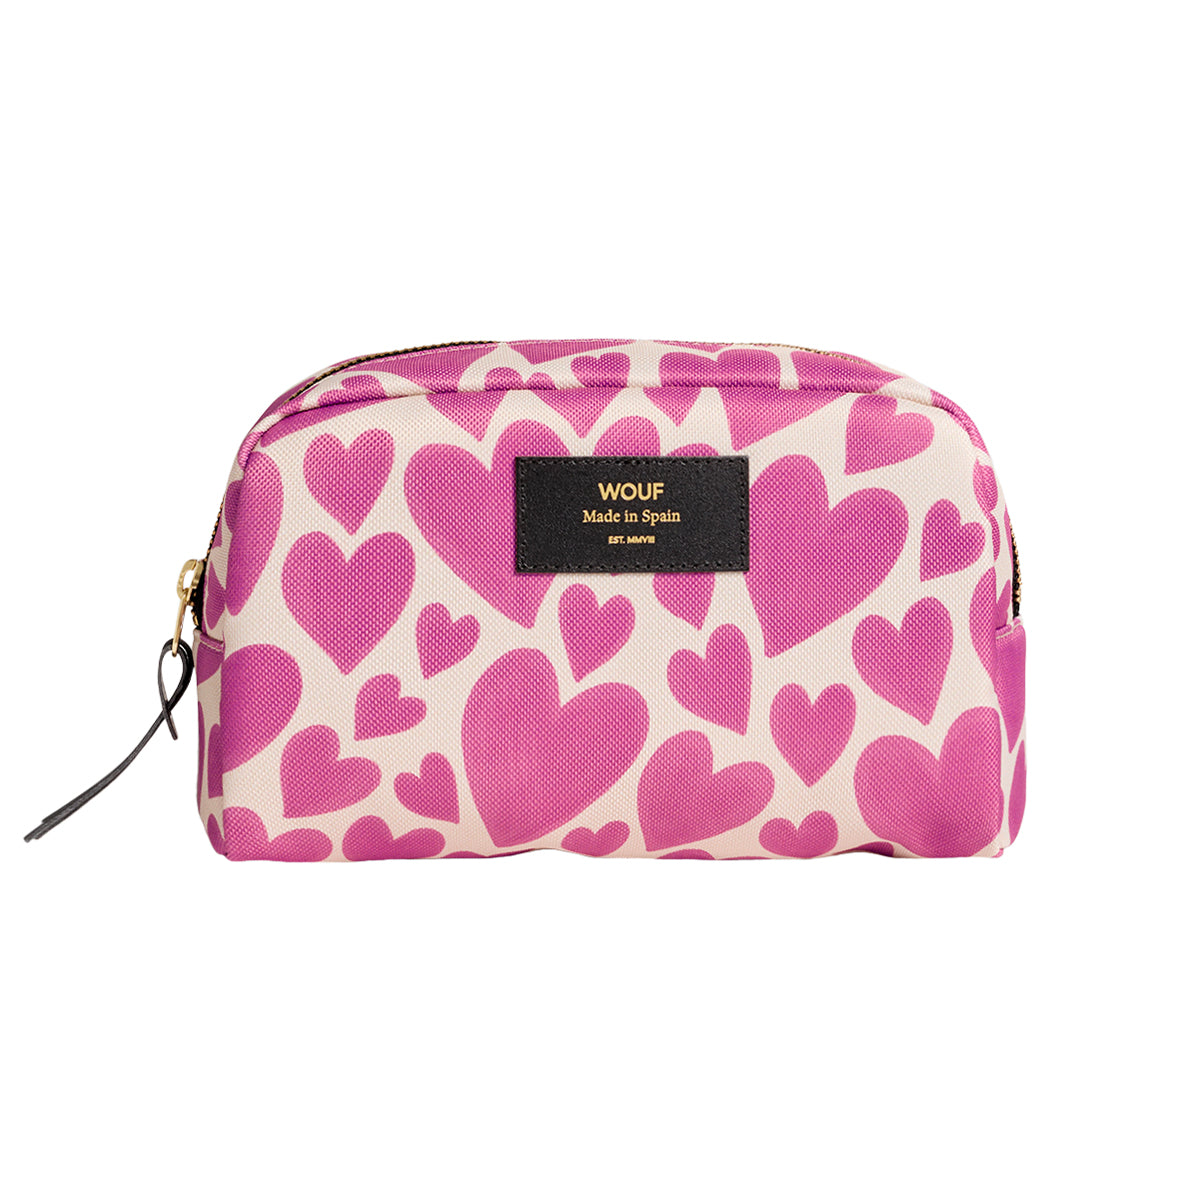 wouf-wouf-pink-love-toiletry-bag